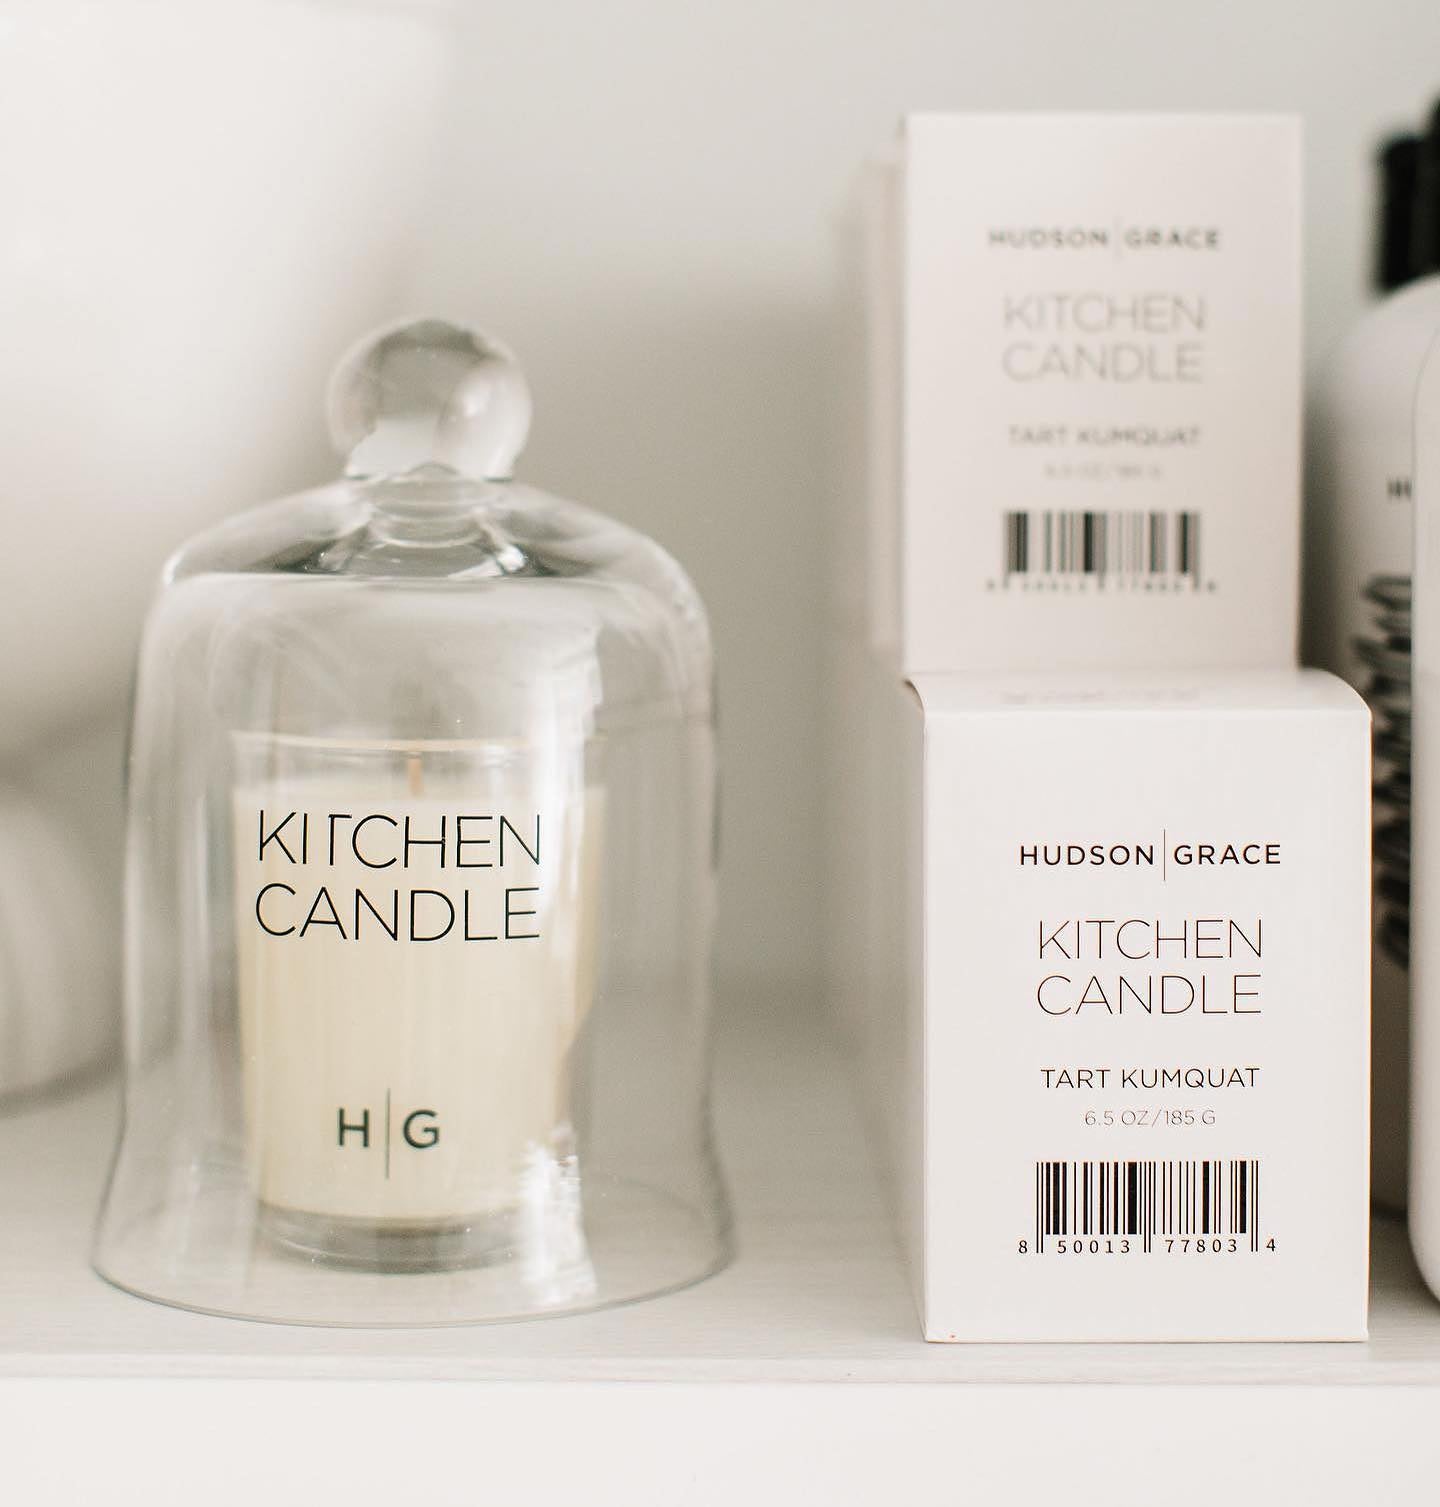 Hudson Grace Scented Kitchen Candle